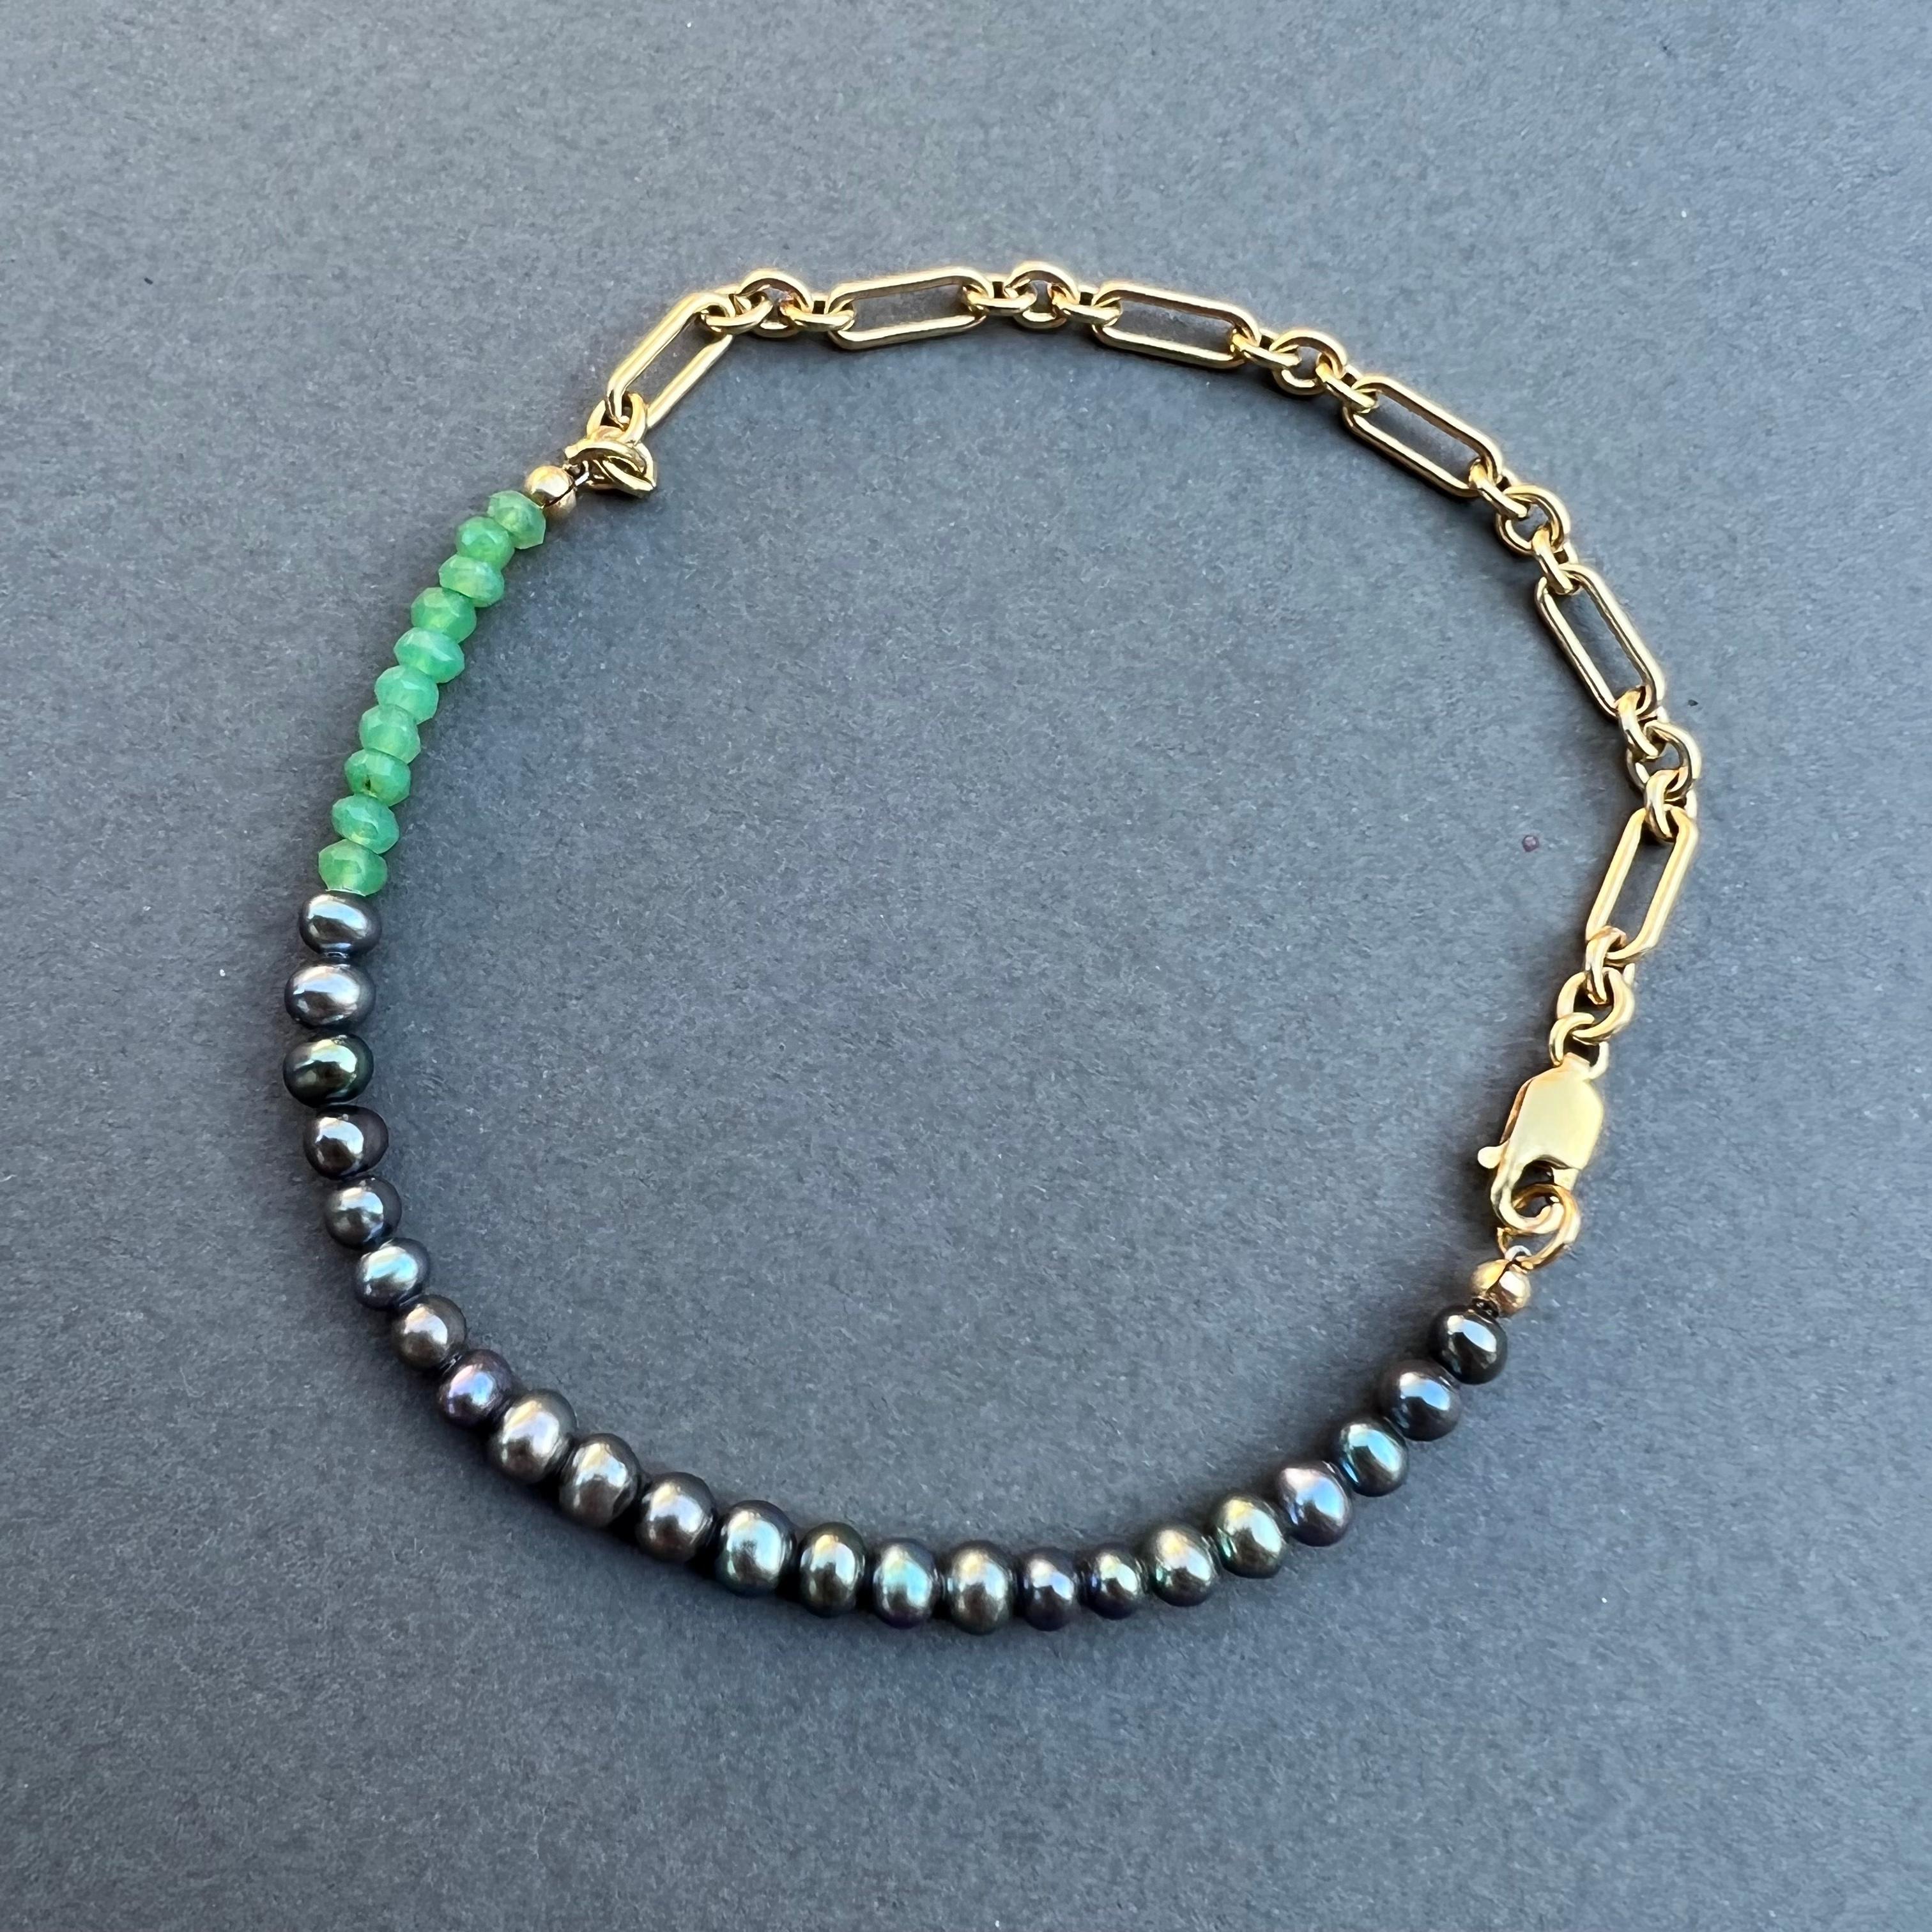 Round Cut Black Pearl Bracelet Gold Filled Chain Chrysoprase J Dauphin For Sale